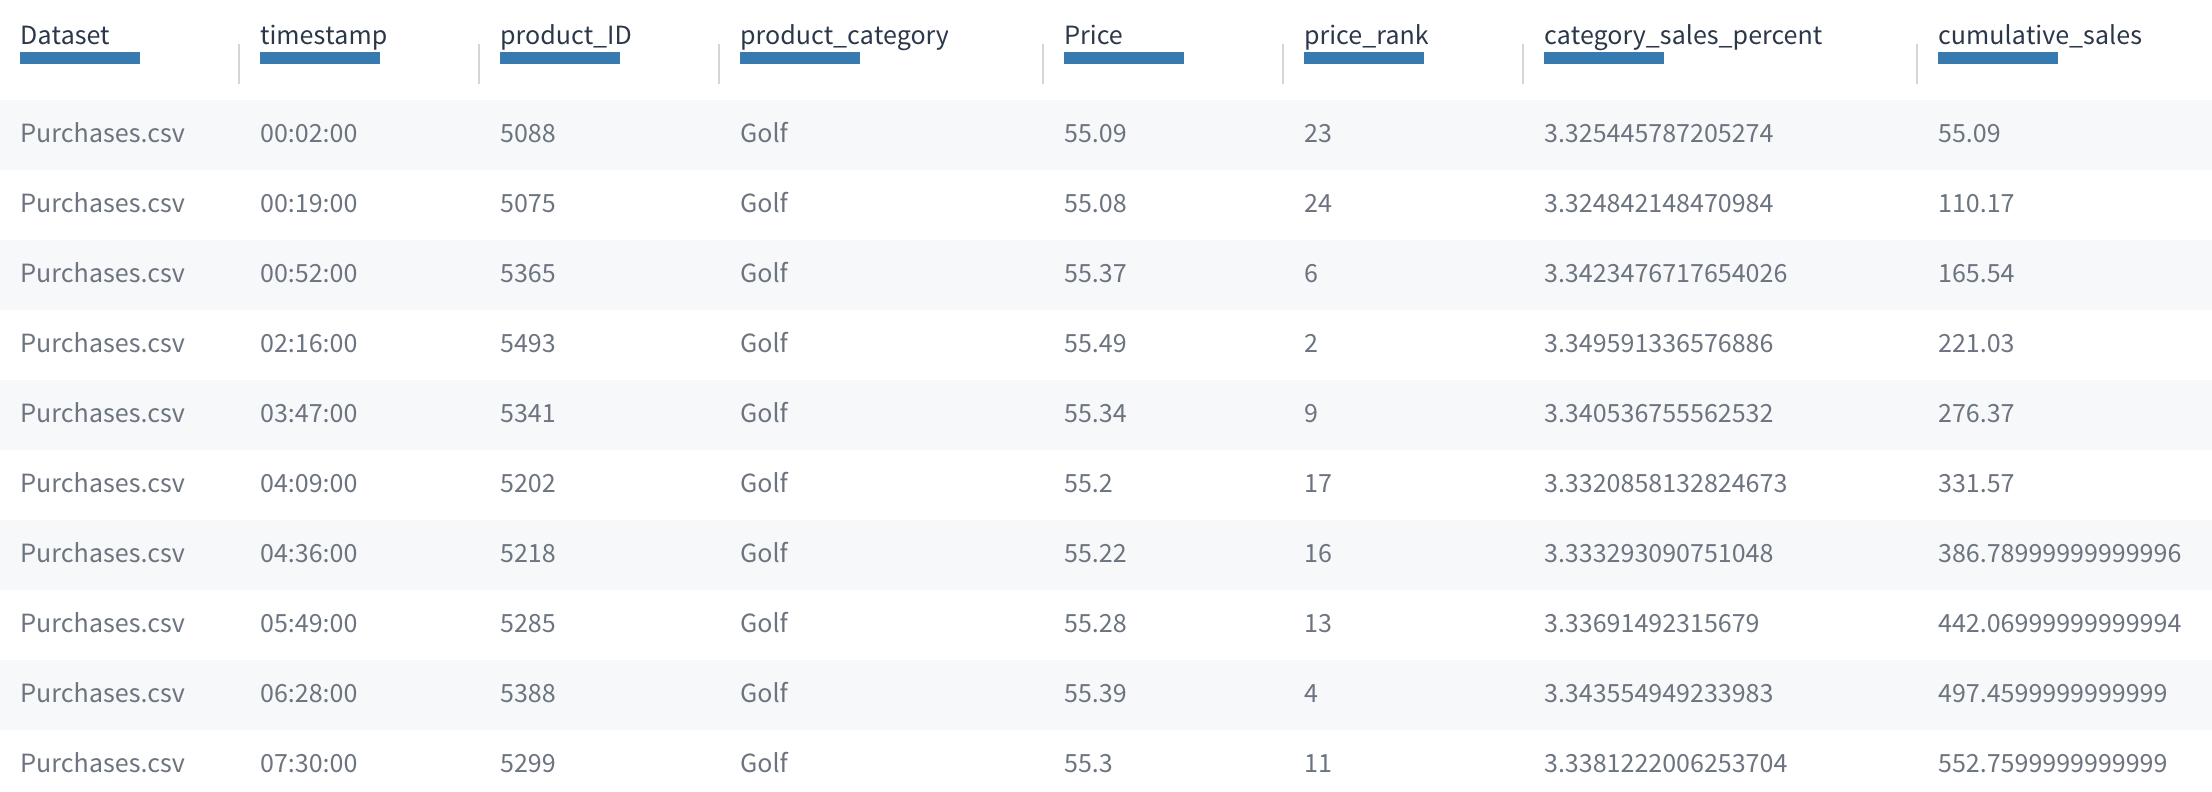 The dataset showing records in the Golf product_category in ascending order by timestamp, with computed values for the new cumulative_sales attribute increasing over time.